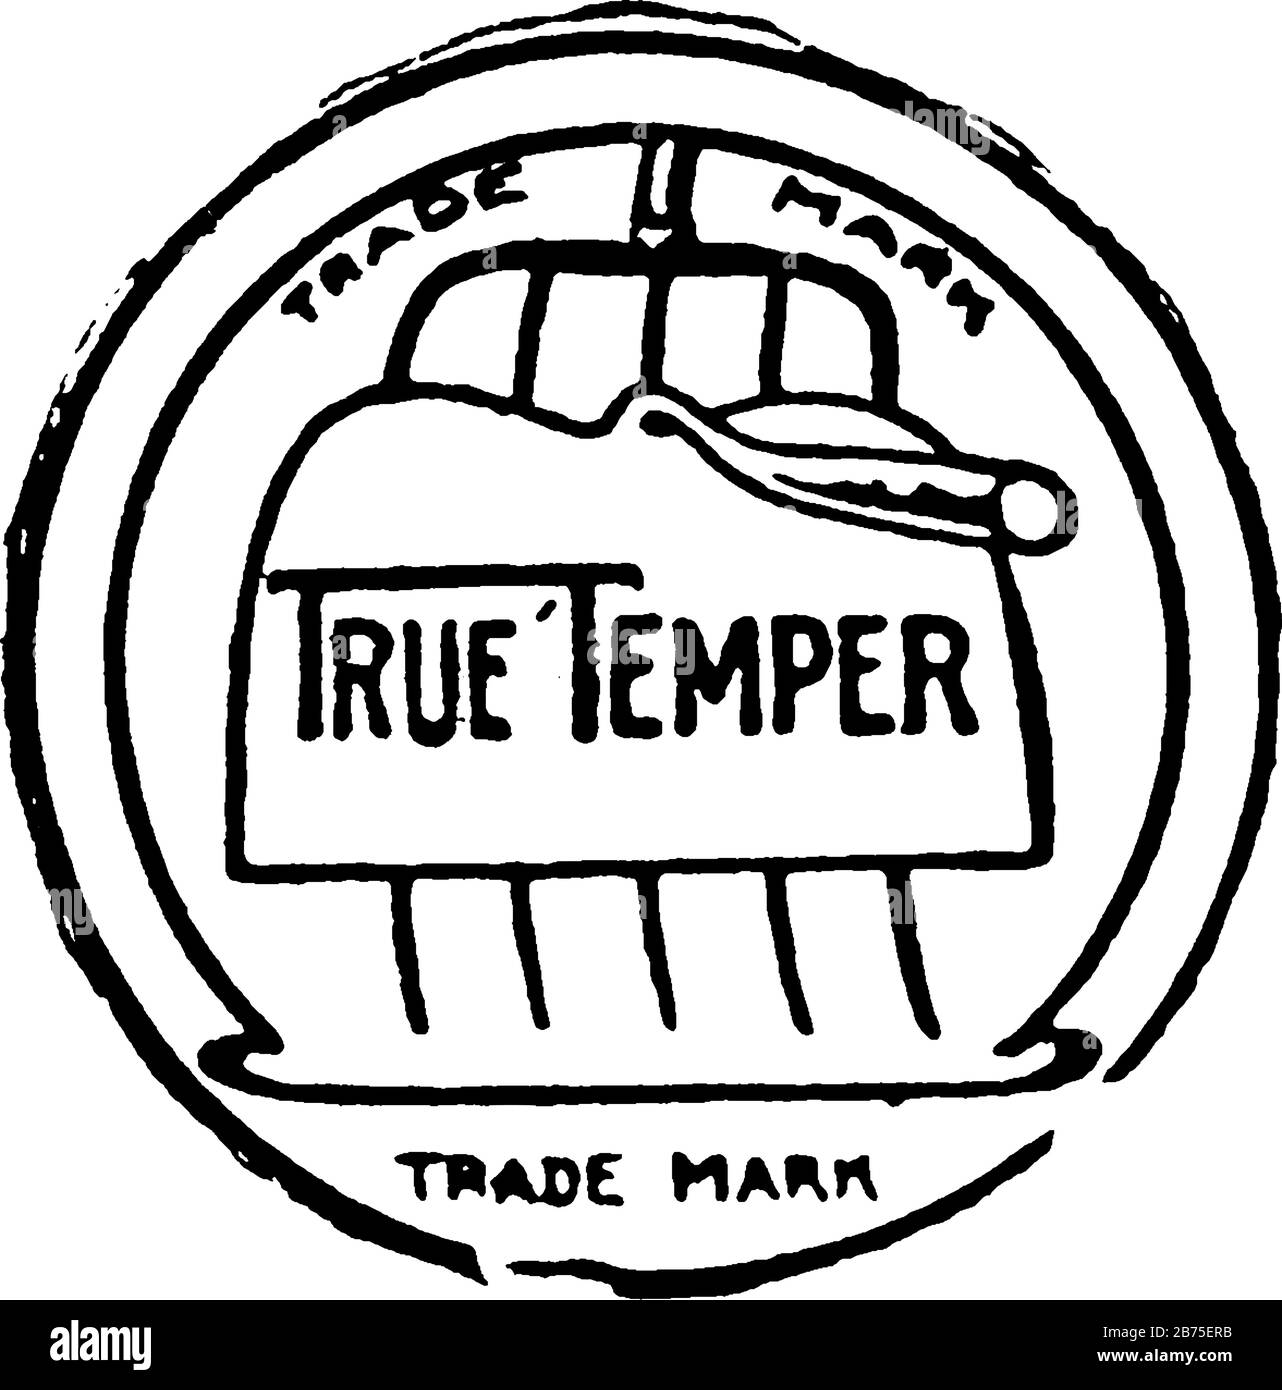 True temper seal which is uses premium grade steel to engineer the Gold Standard of golf shafts, vintage line drawing or engraving illustration. Stock Vector